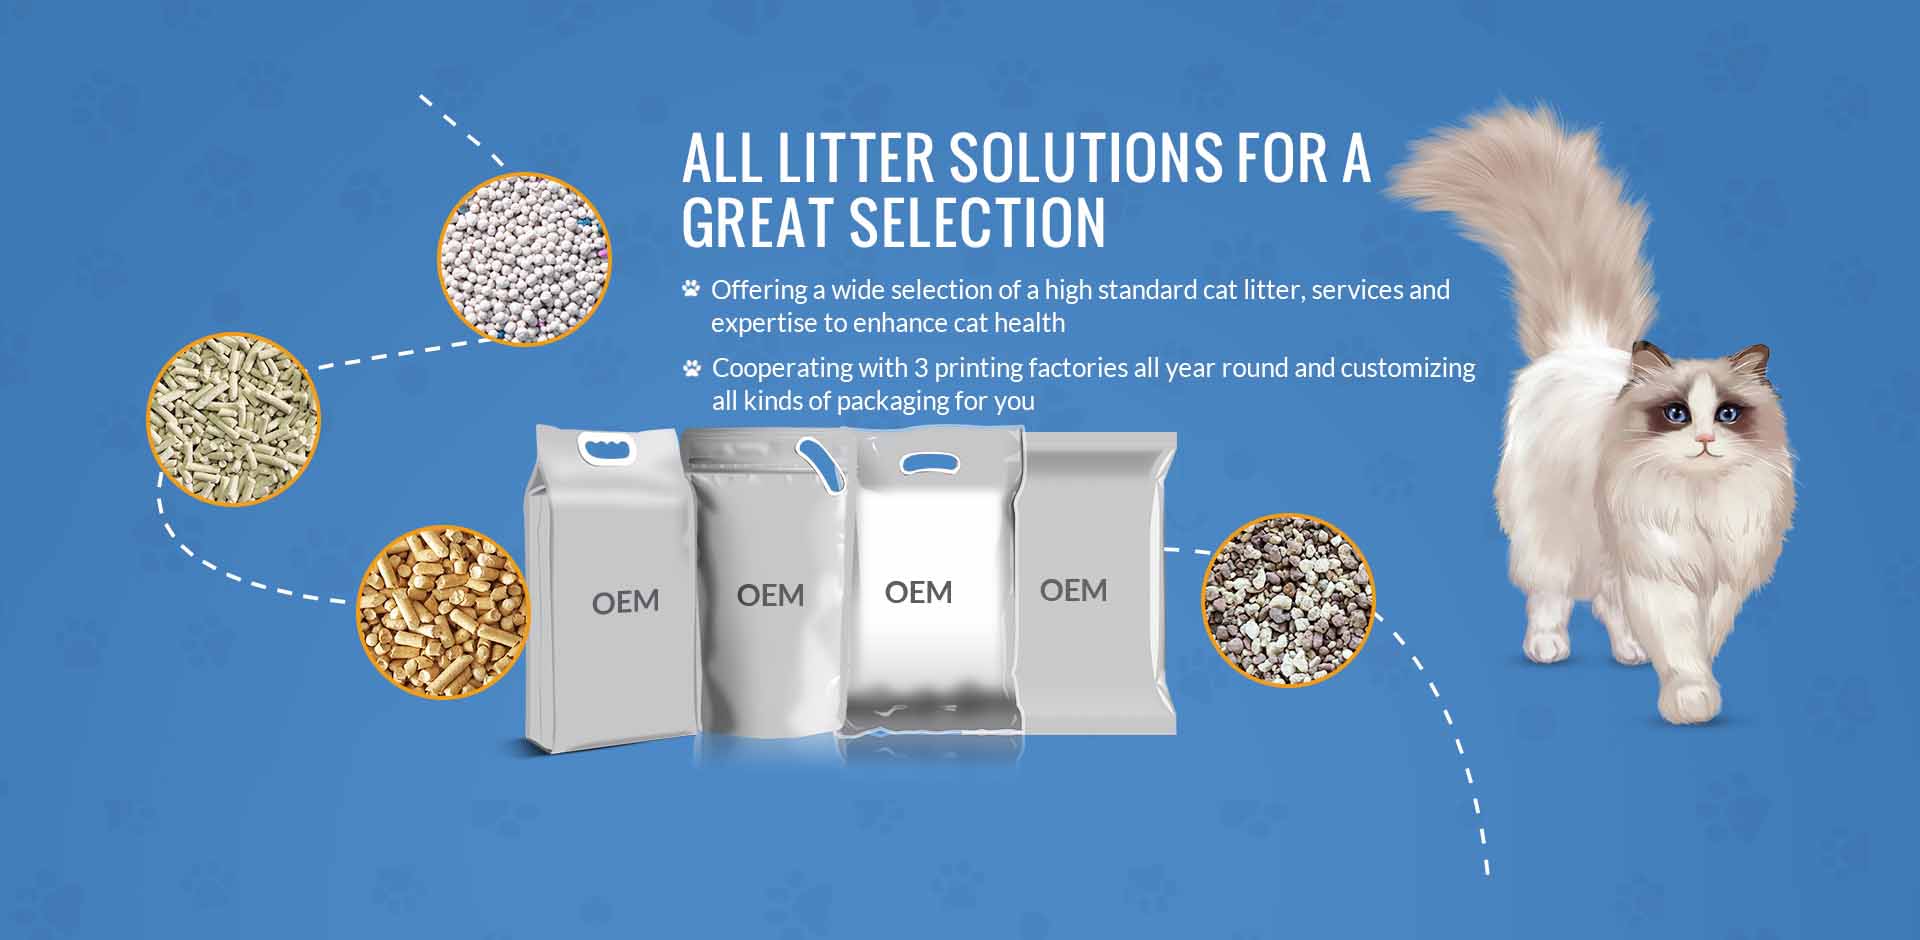 ALL LITTER SOLUTIONS FOR A GREAT SELECTION